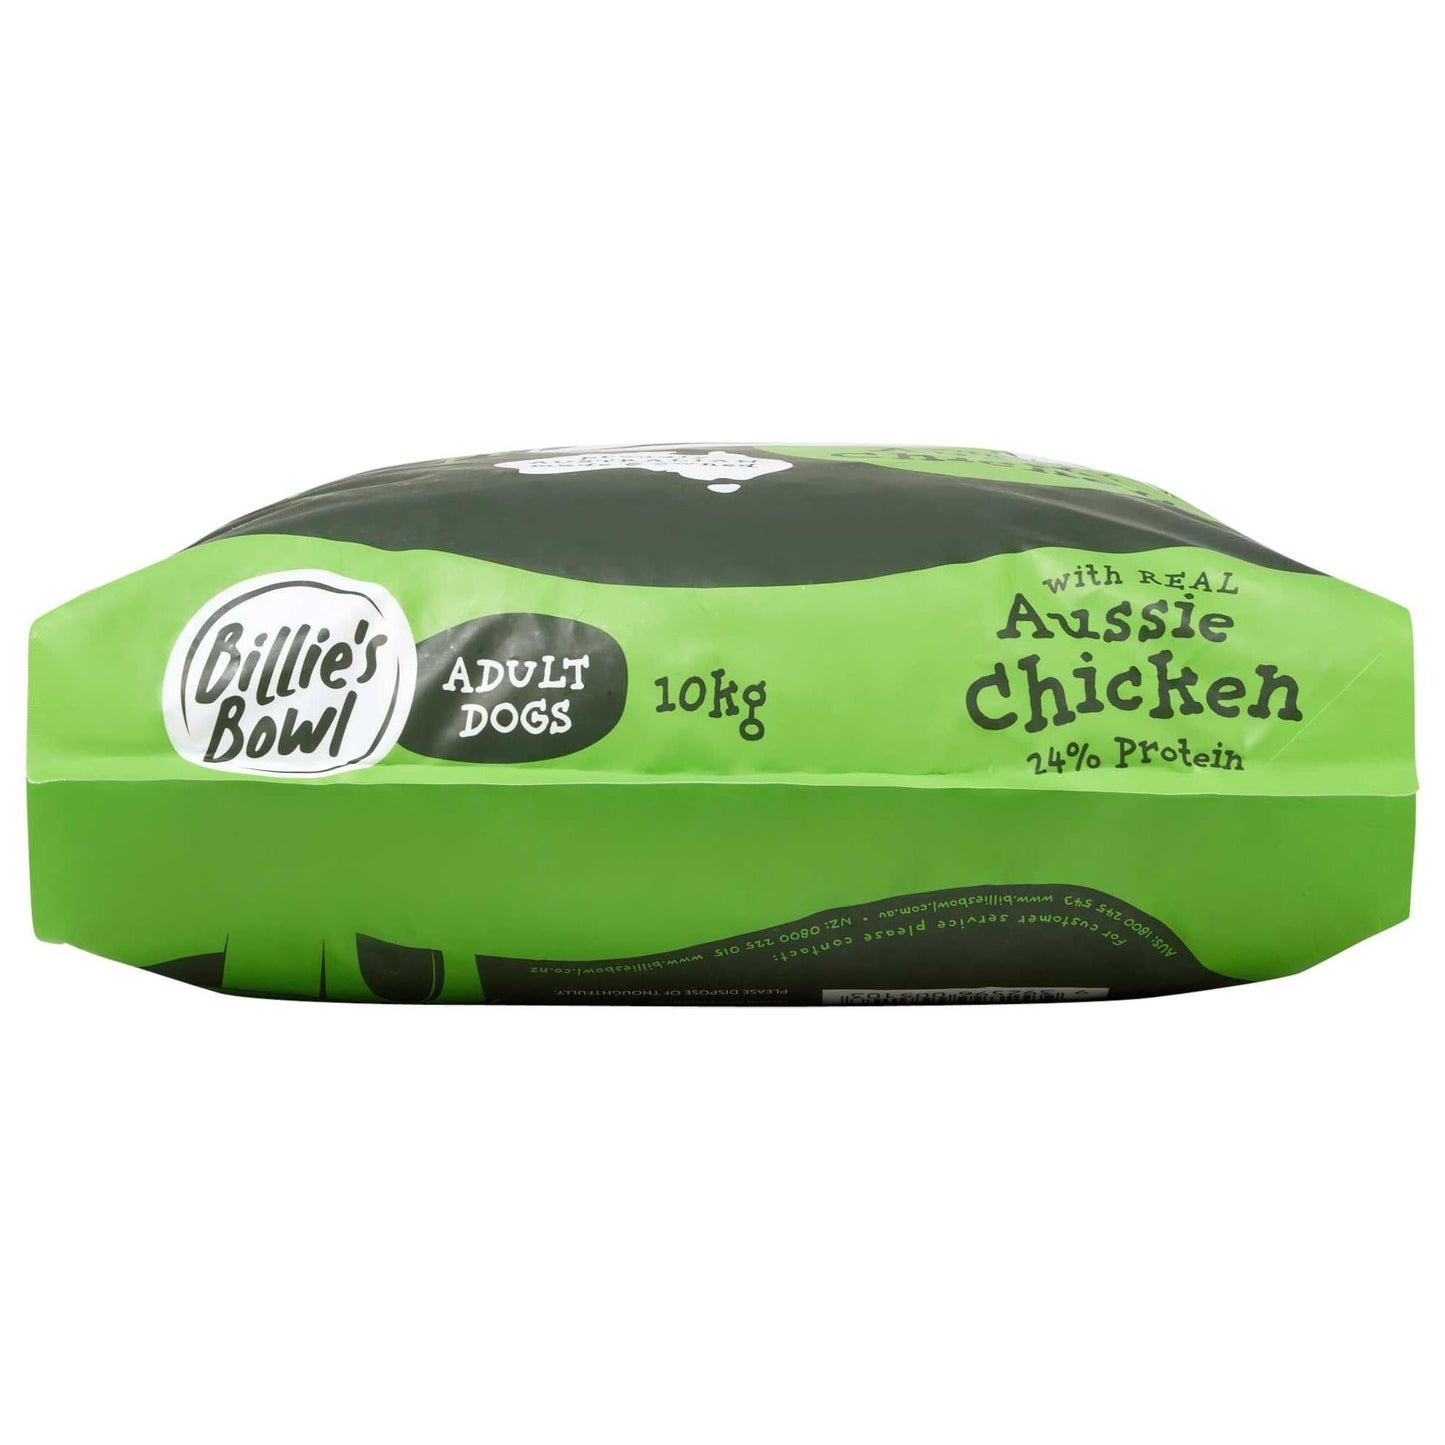 Billie's Bowl Adult with REAL Aussie Chicken Dry Dog Food 10kg